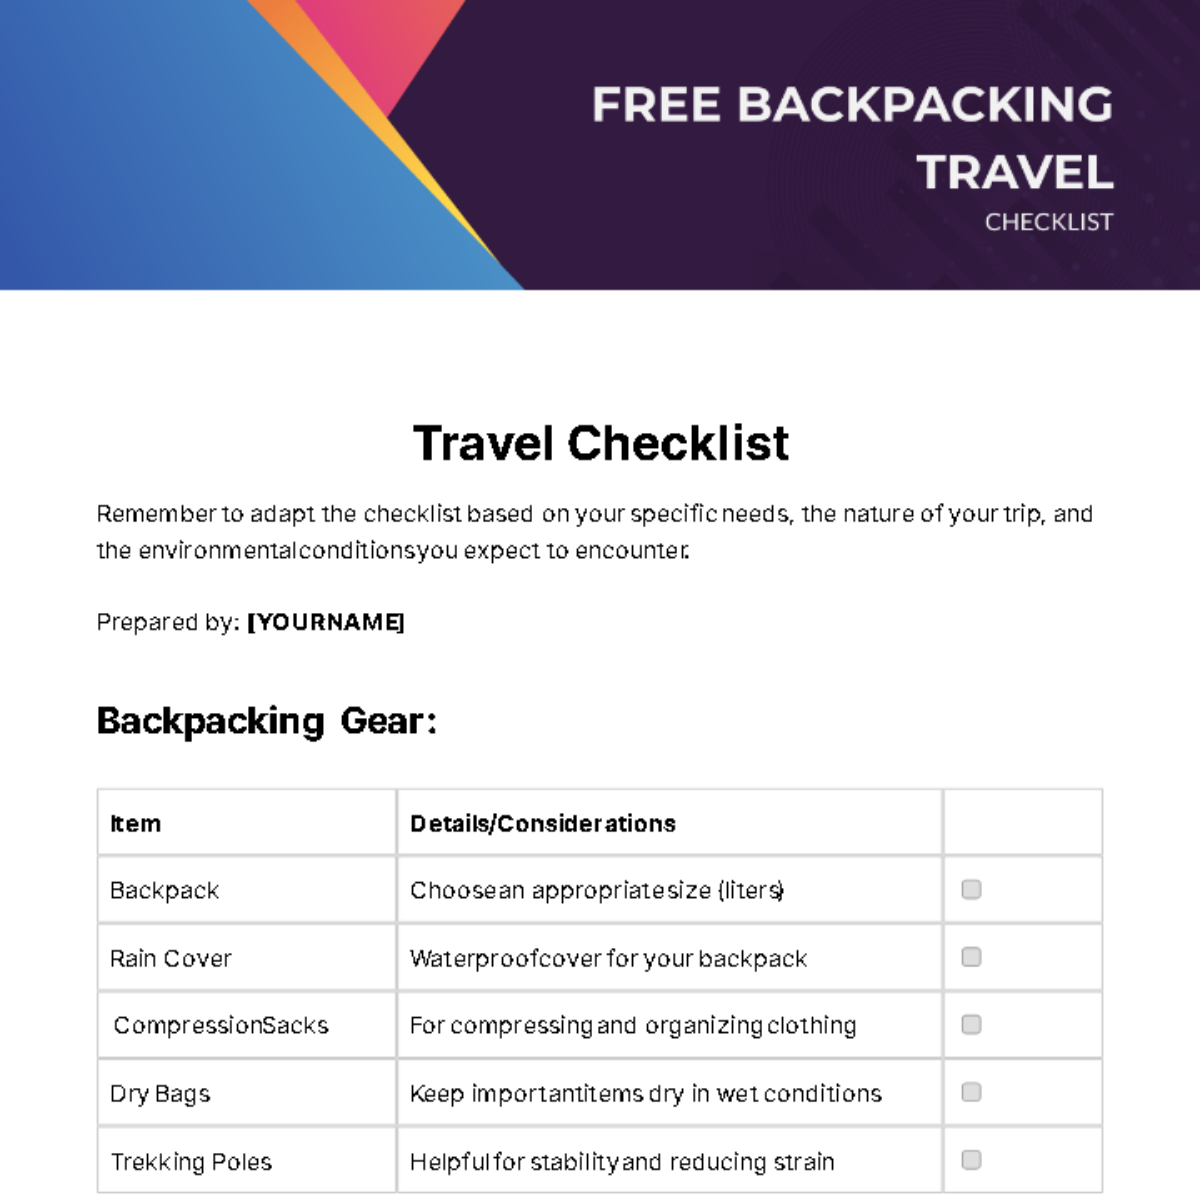 Free Backpacking Travel Checklist Template